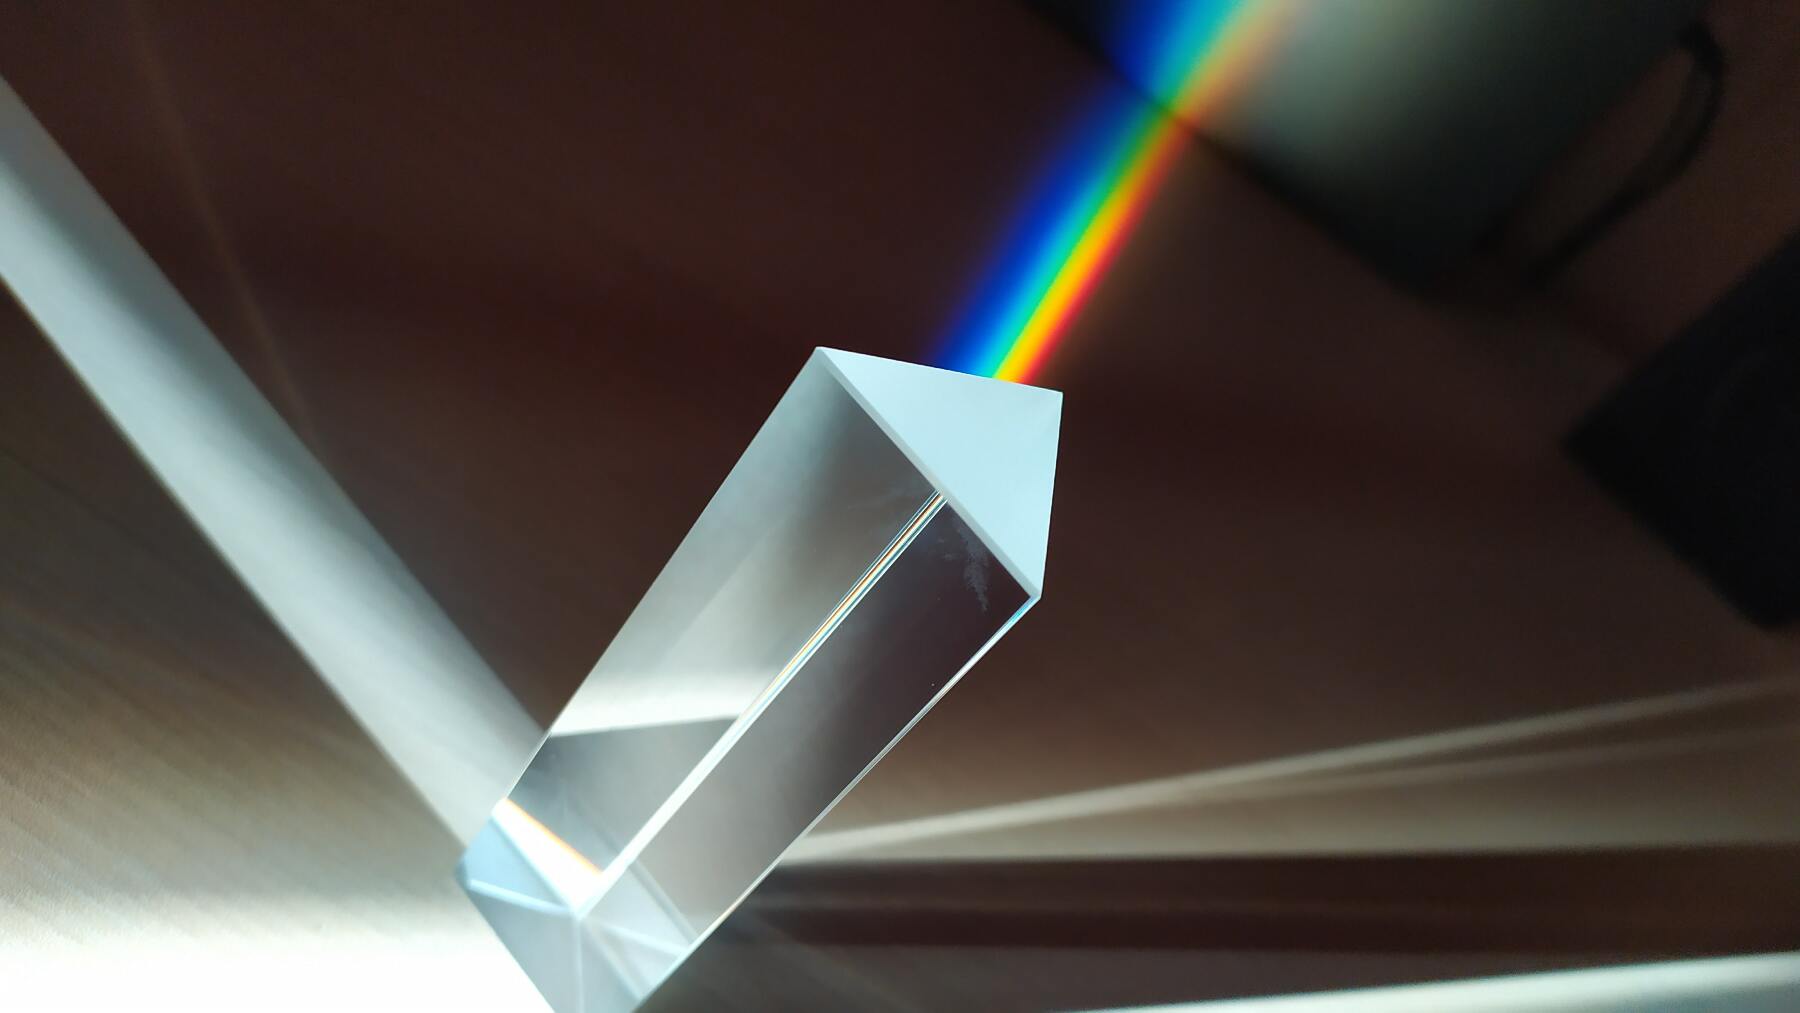 White light being split into colors by a prism. The white light shines on the prism from the bottom left, and most of it is refracted and split as it passes through the prism. image credit Pexels